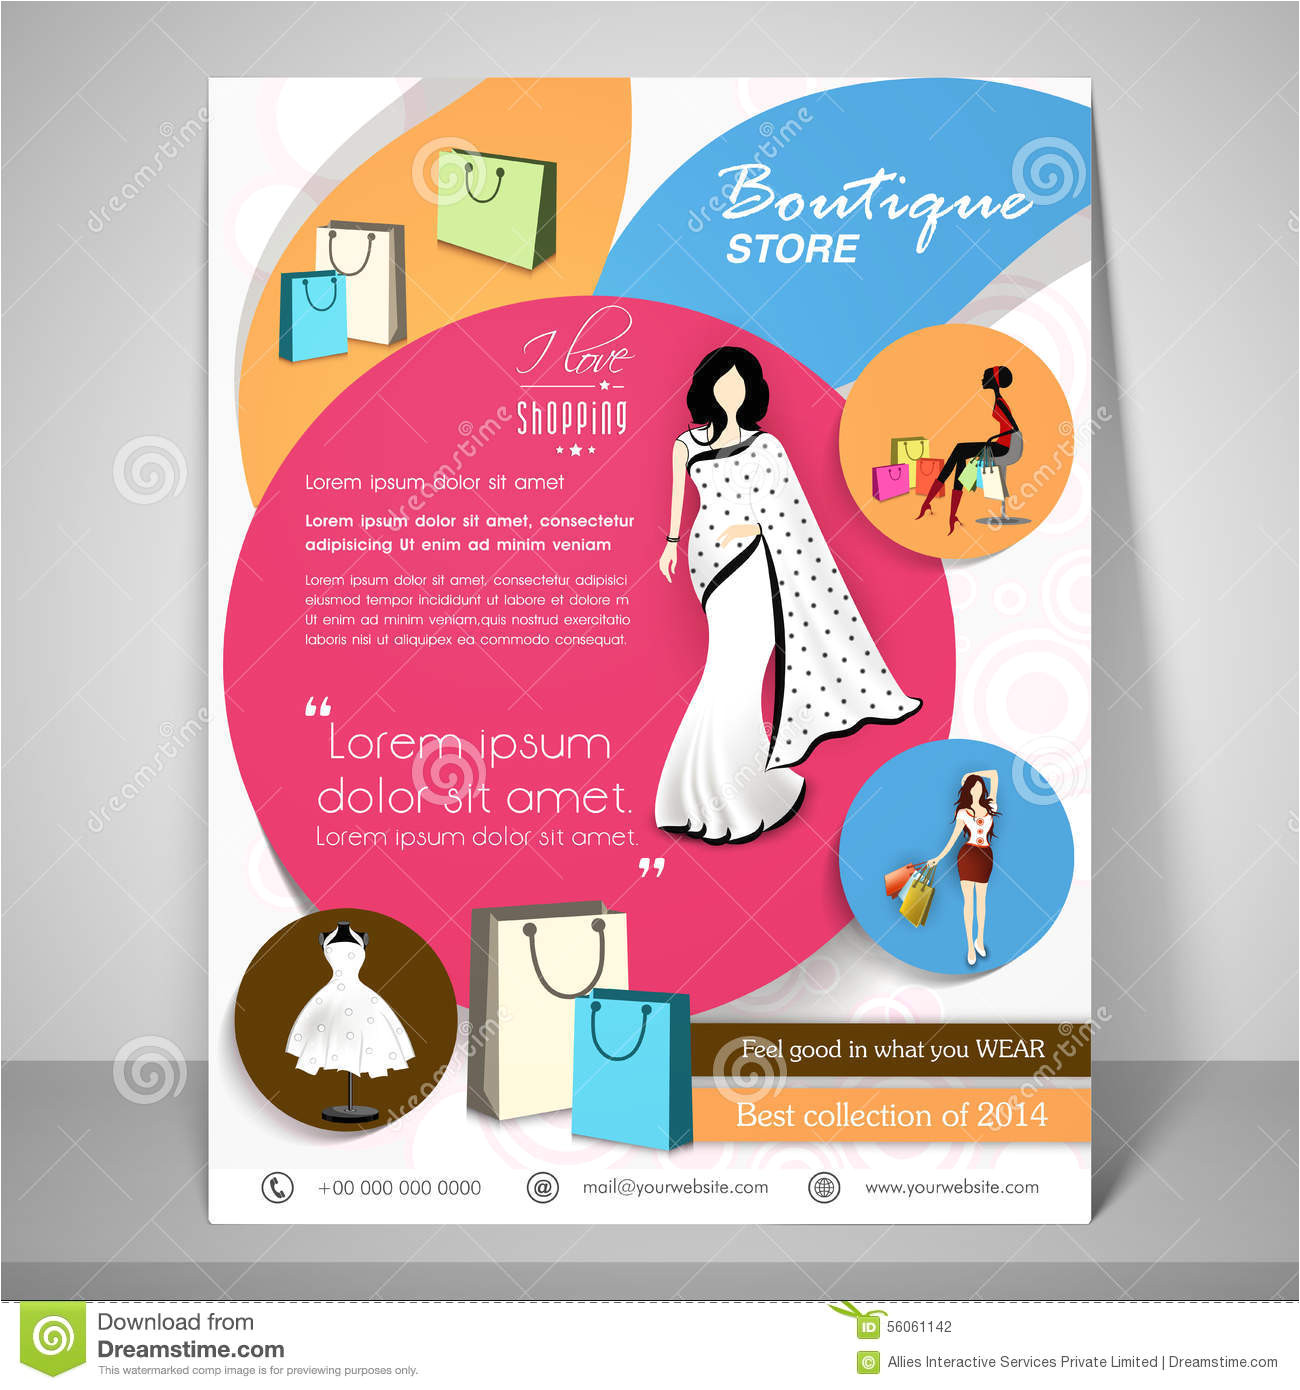 stock photo boutique store template banner flyer design illustration young modern girls image56061142